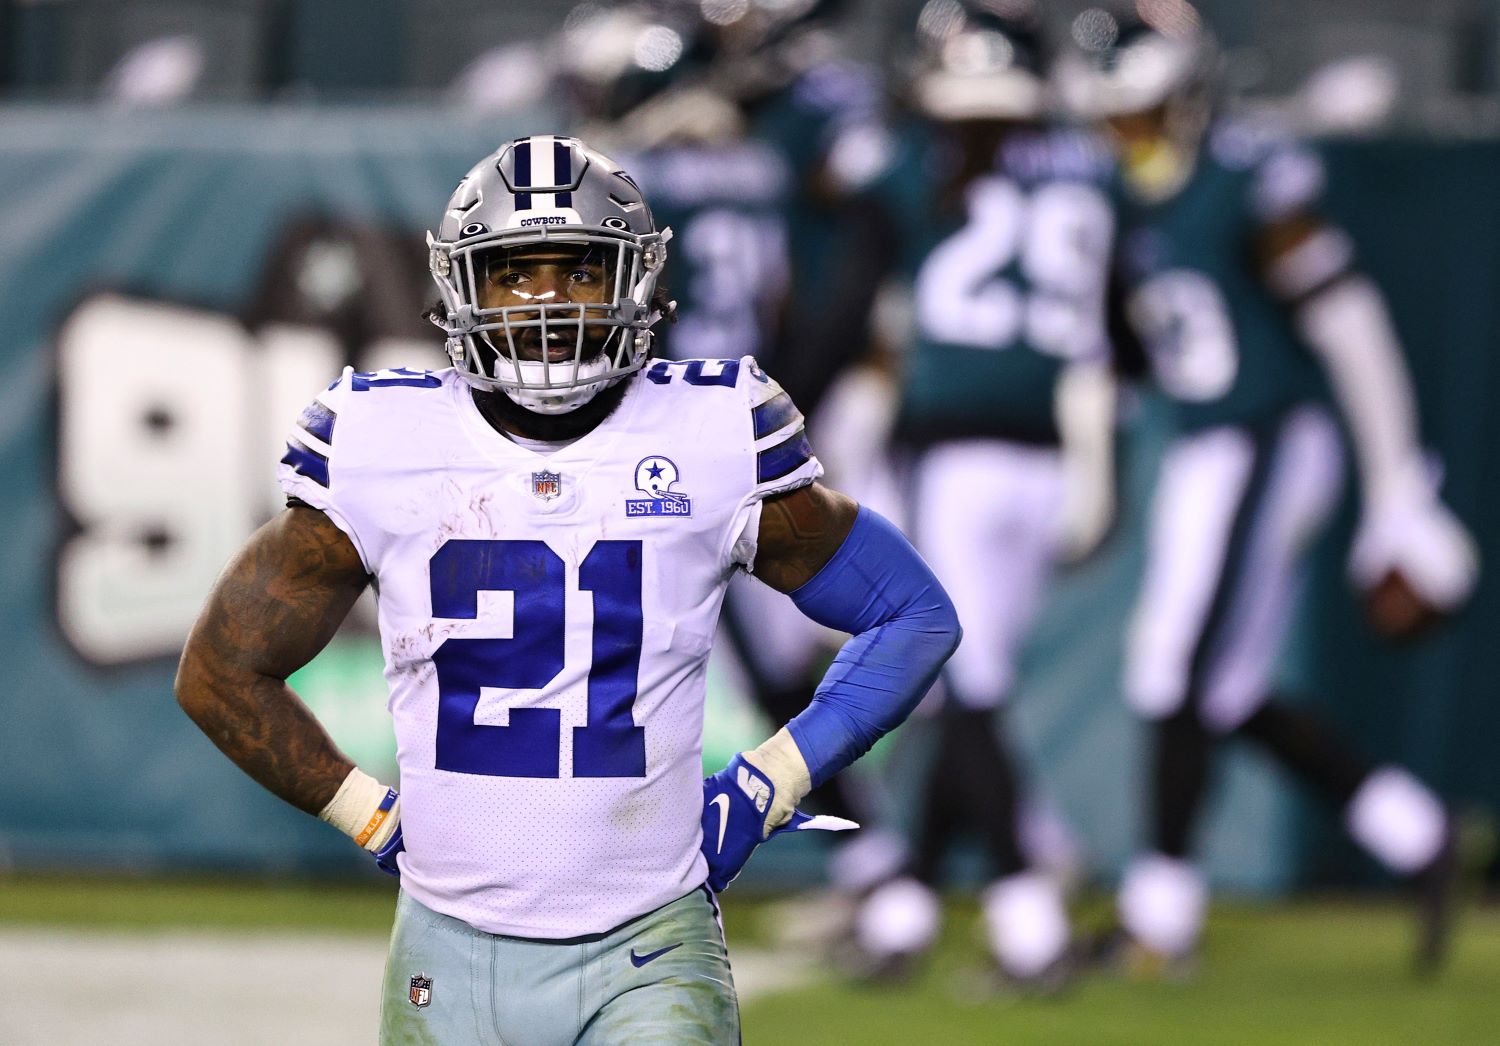 Ezekiel Elliott just got put on blast for his disappointing play by former Dallas Cowboys defensive lineman Marcus Spears.